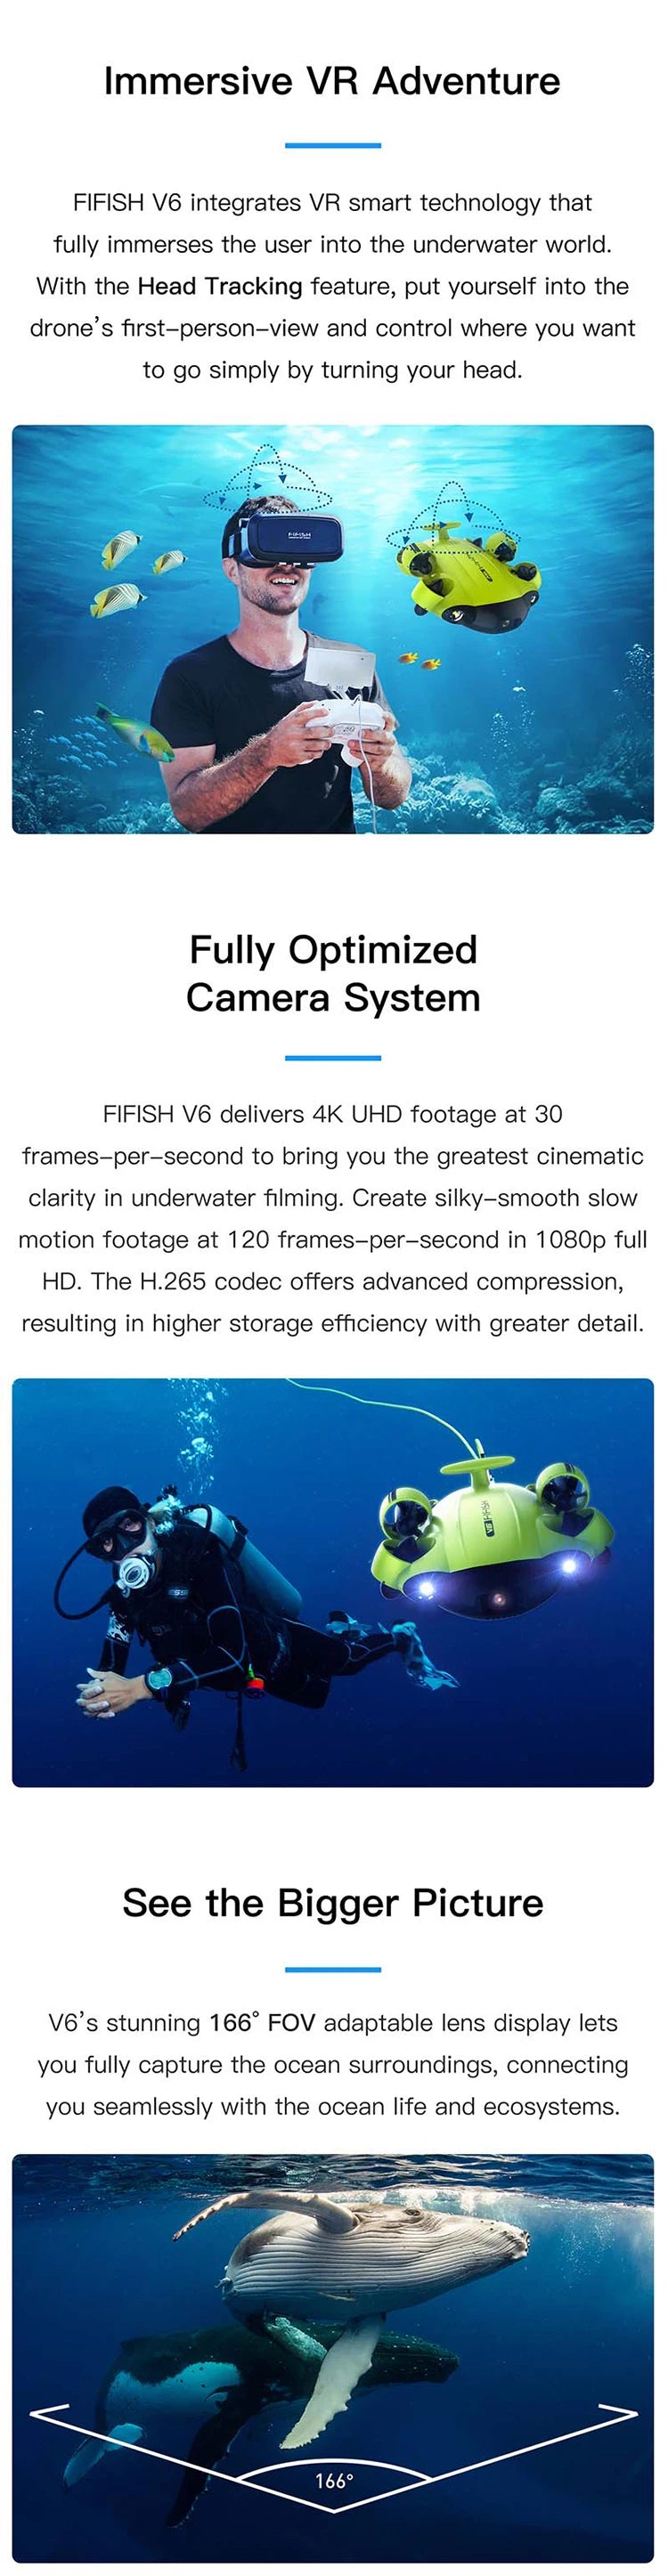 Fifish V6 - professional Underwater Drone, Fifish V6 delivers 4K UHD footage at 30 frames-per-second 